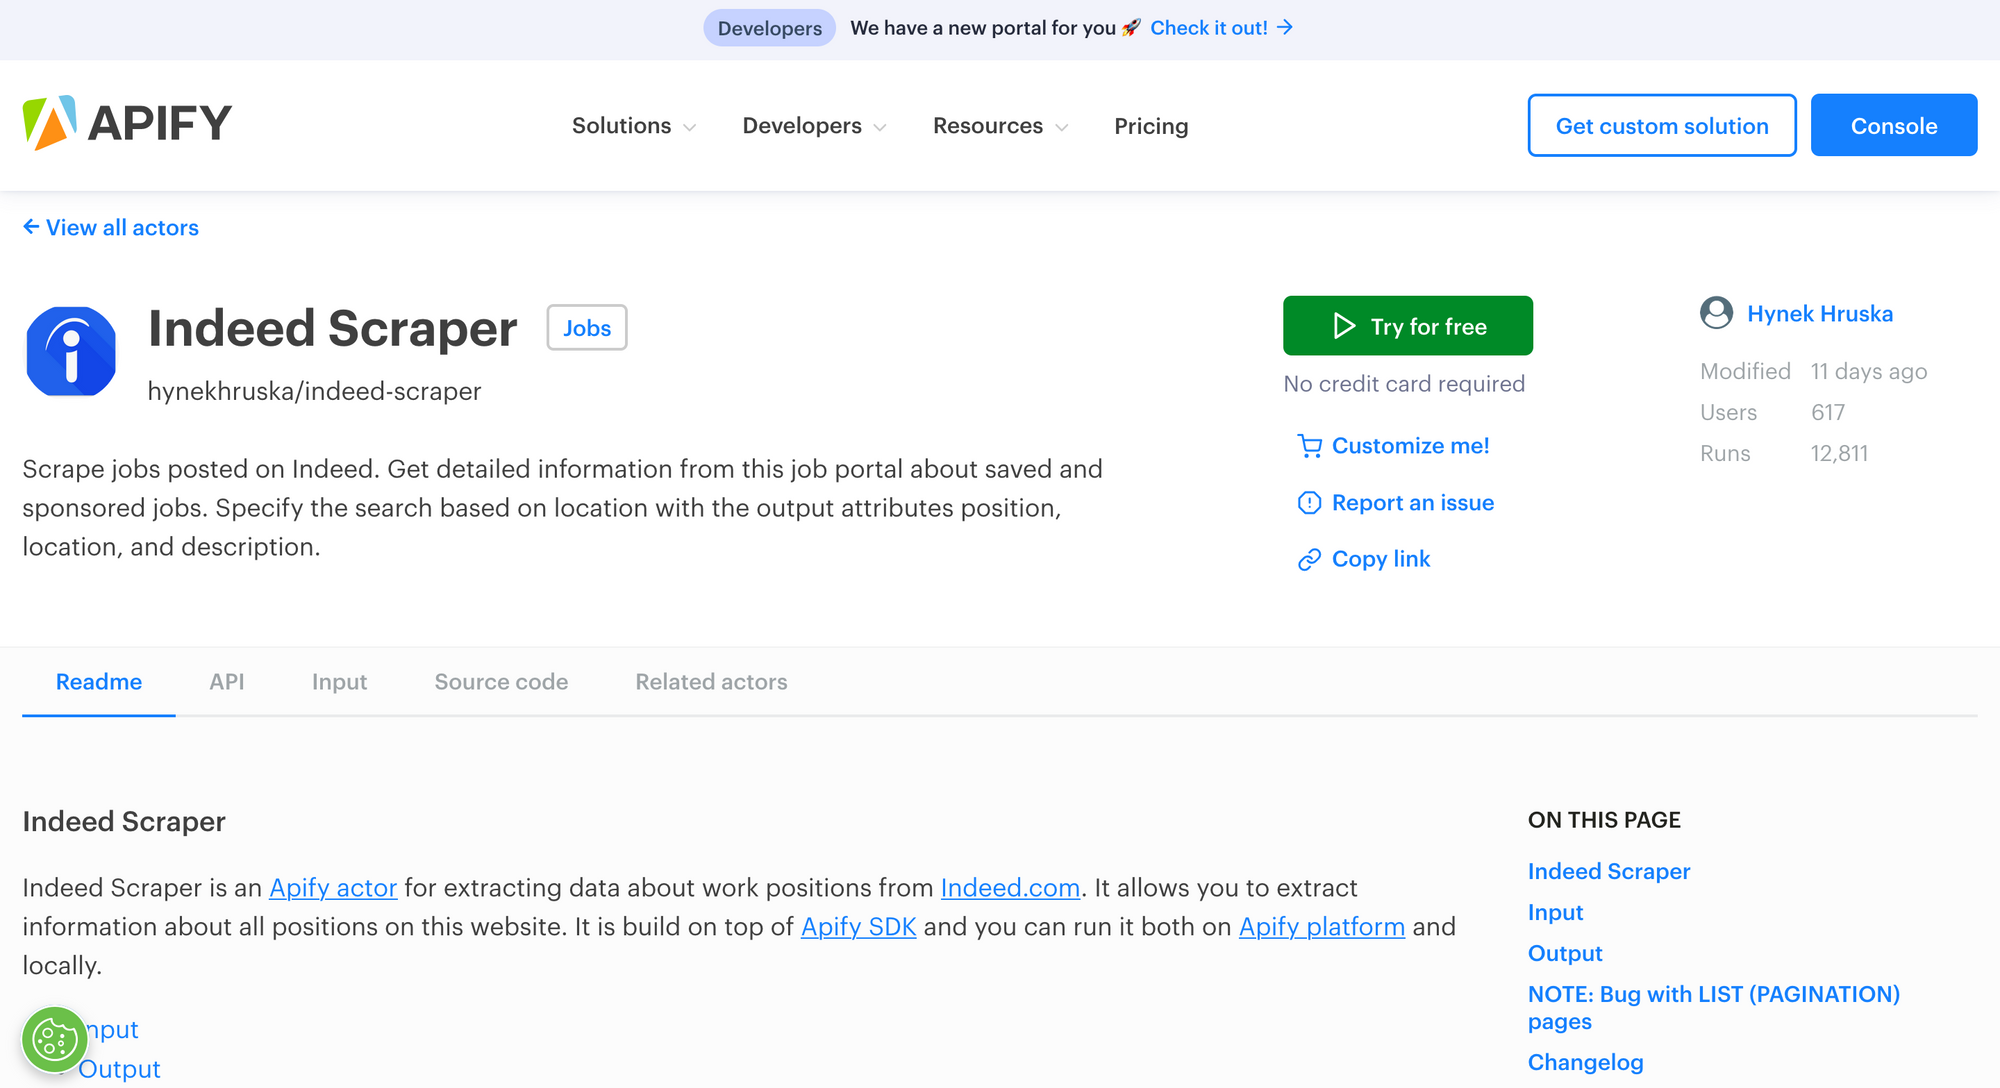 Indeed Scraper lets you collect data from Indeed job listings